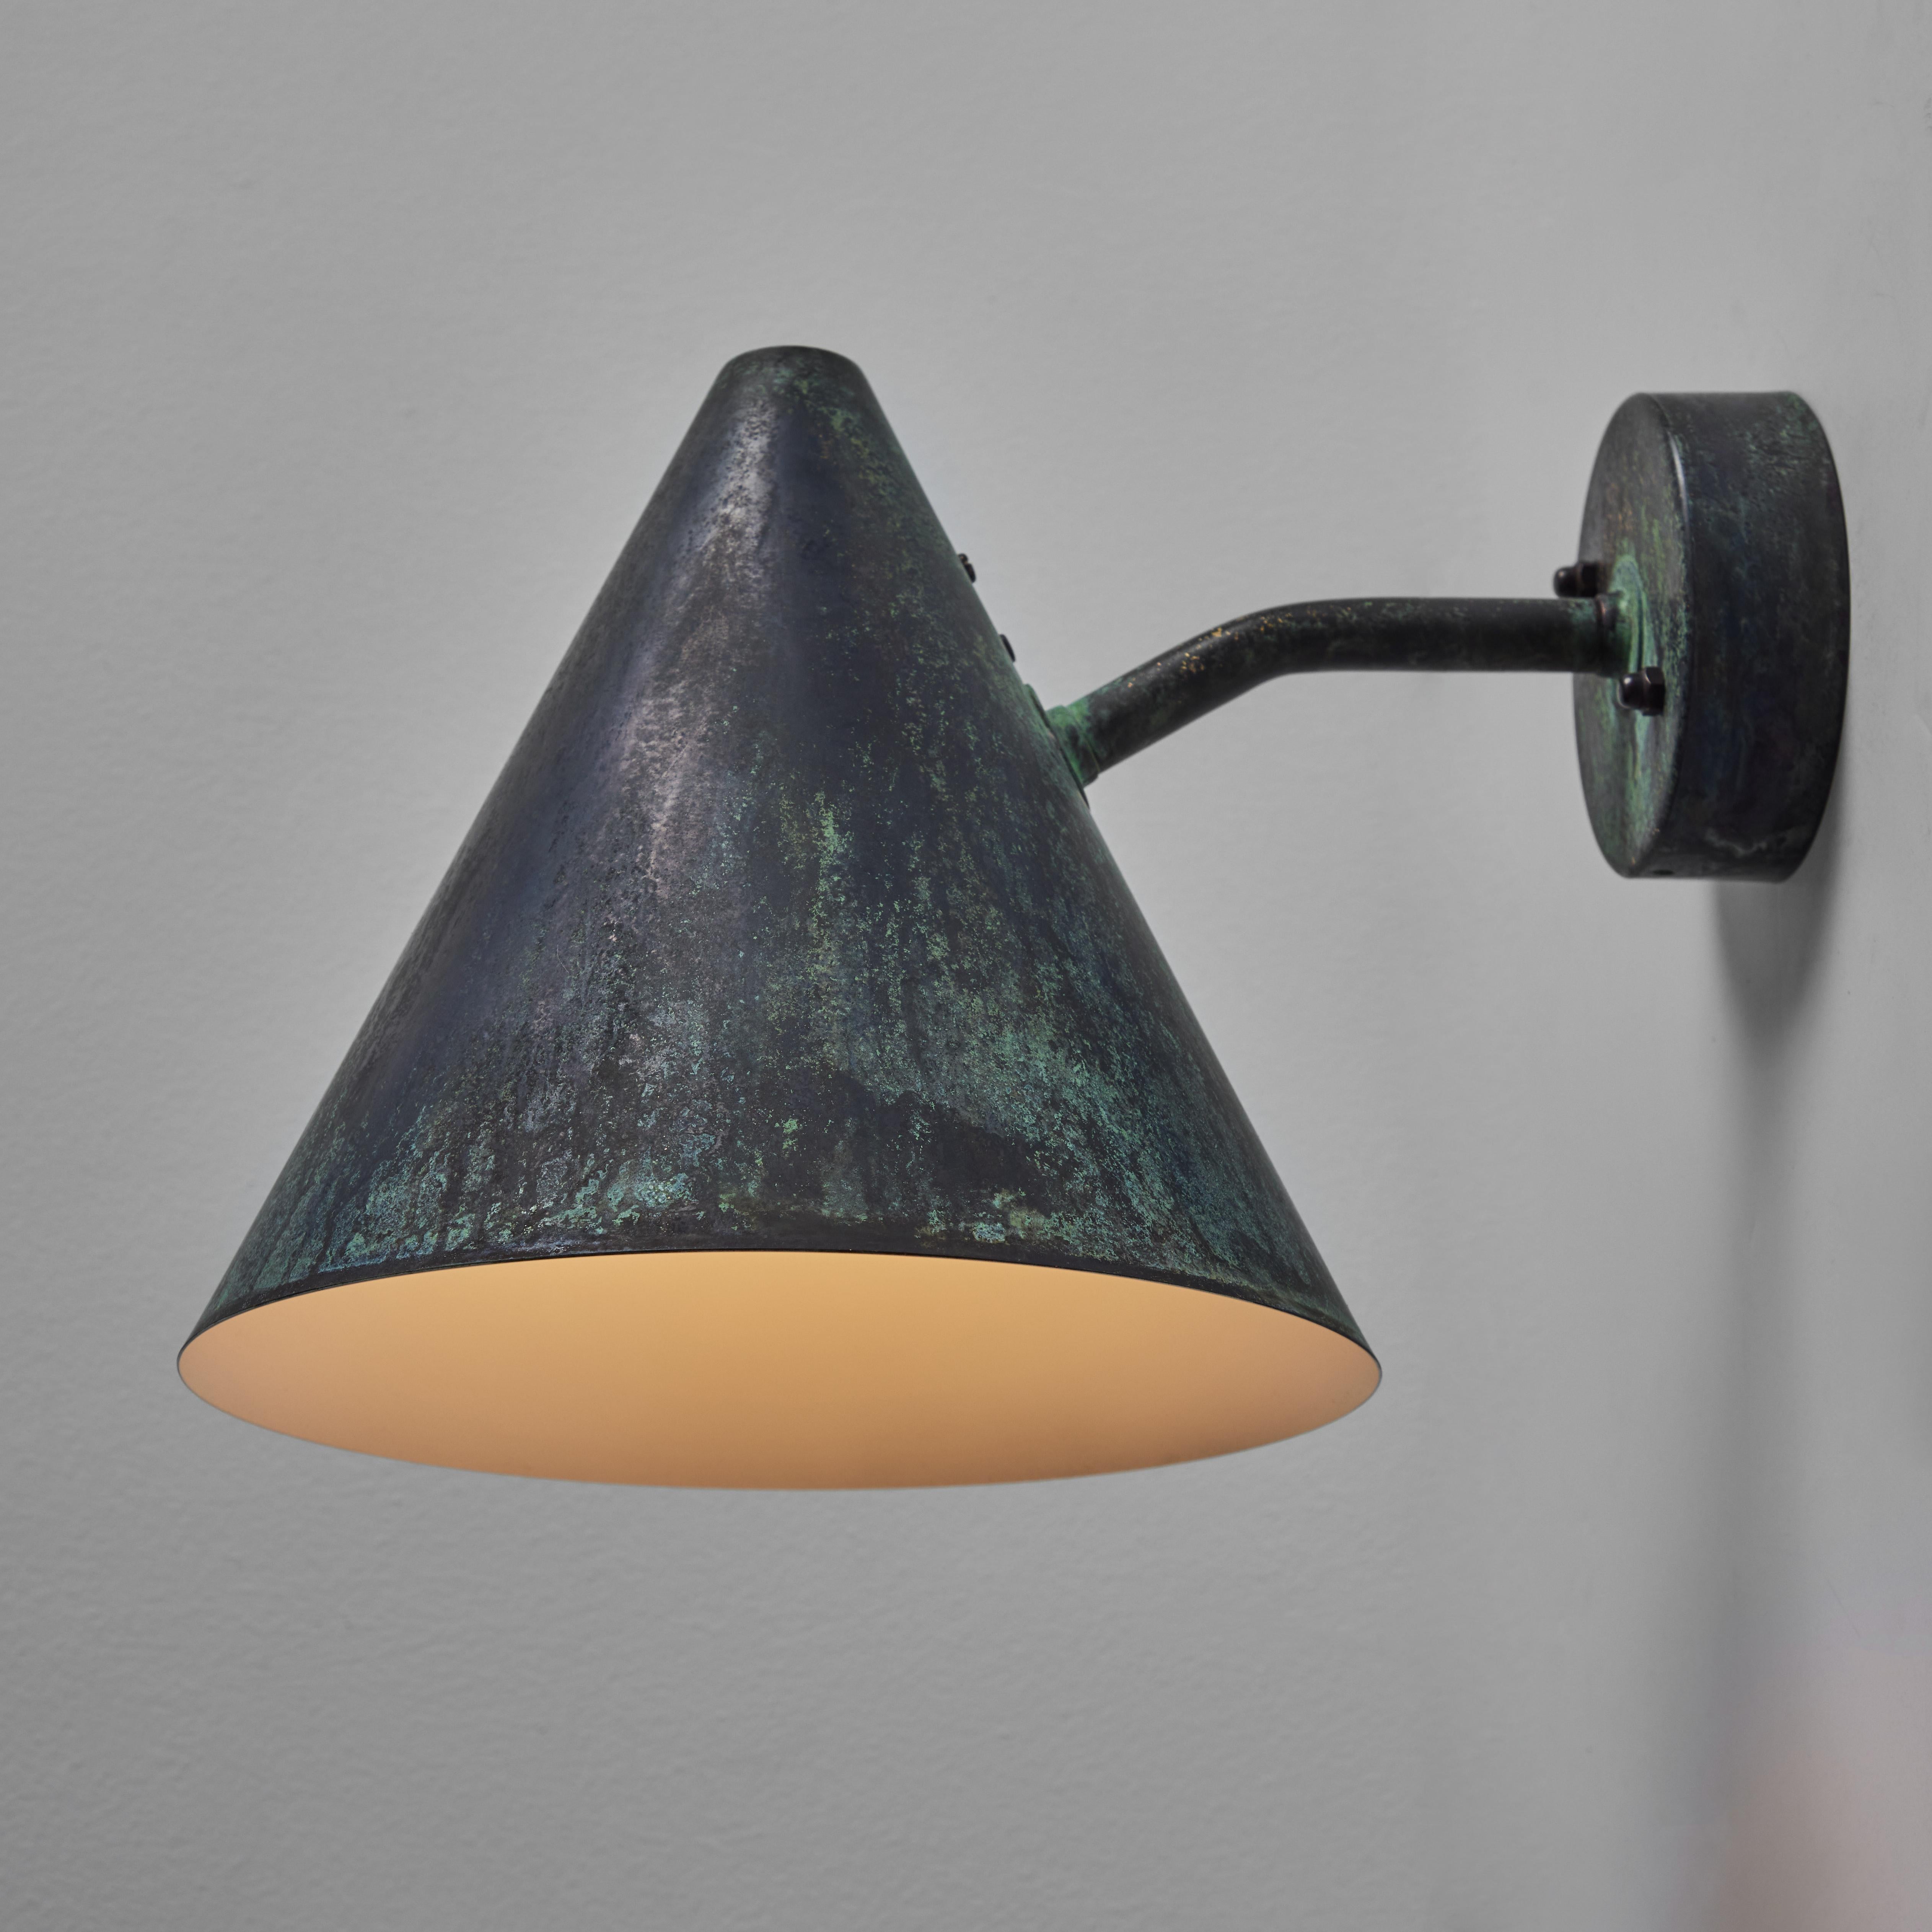 Hans-Agne Jakobsson 'Tratten' Darkly Patinated Outdoor Sconce For Sale 2